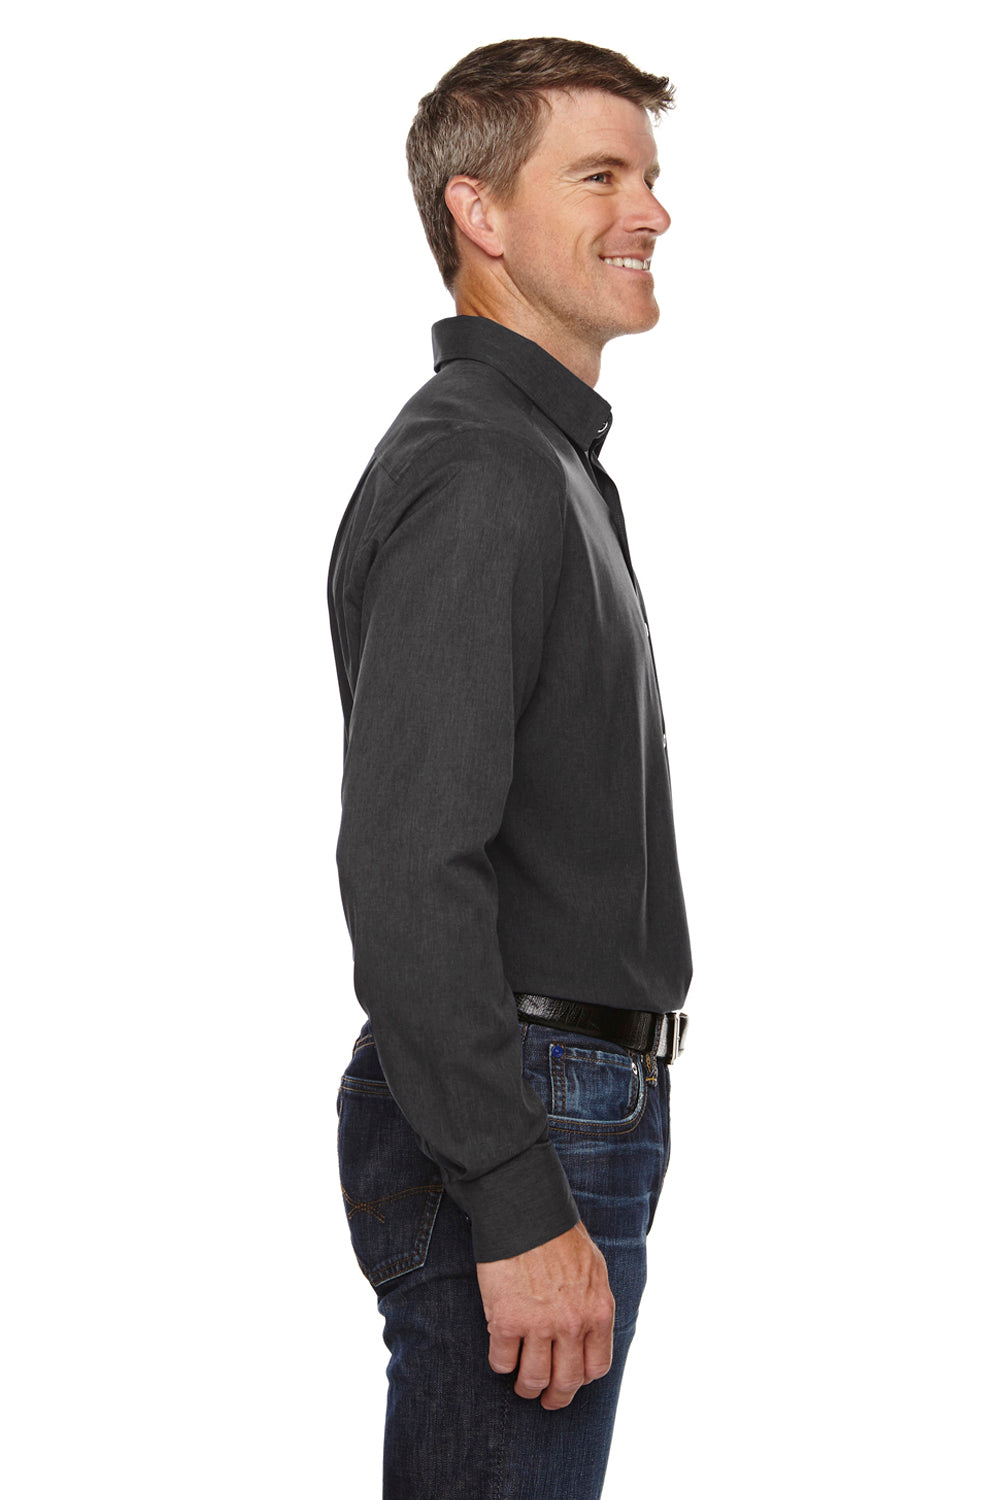 North End 88802 Mens Sport Blue Performance Moisture Wicking Long Sleeve Button Down Shirt Heather Carbon Grey Side